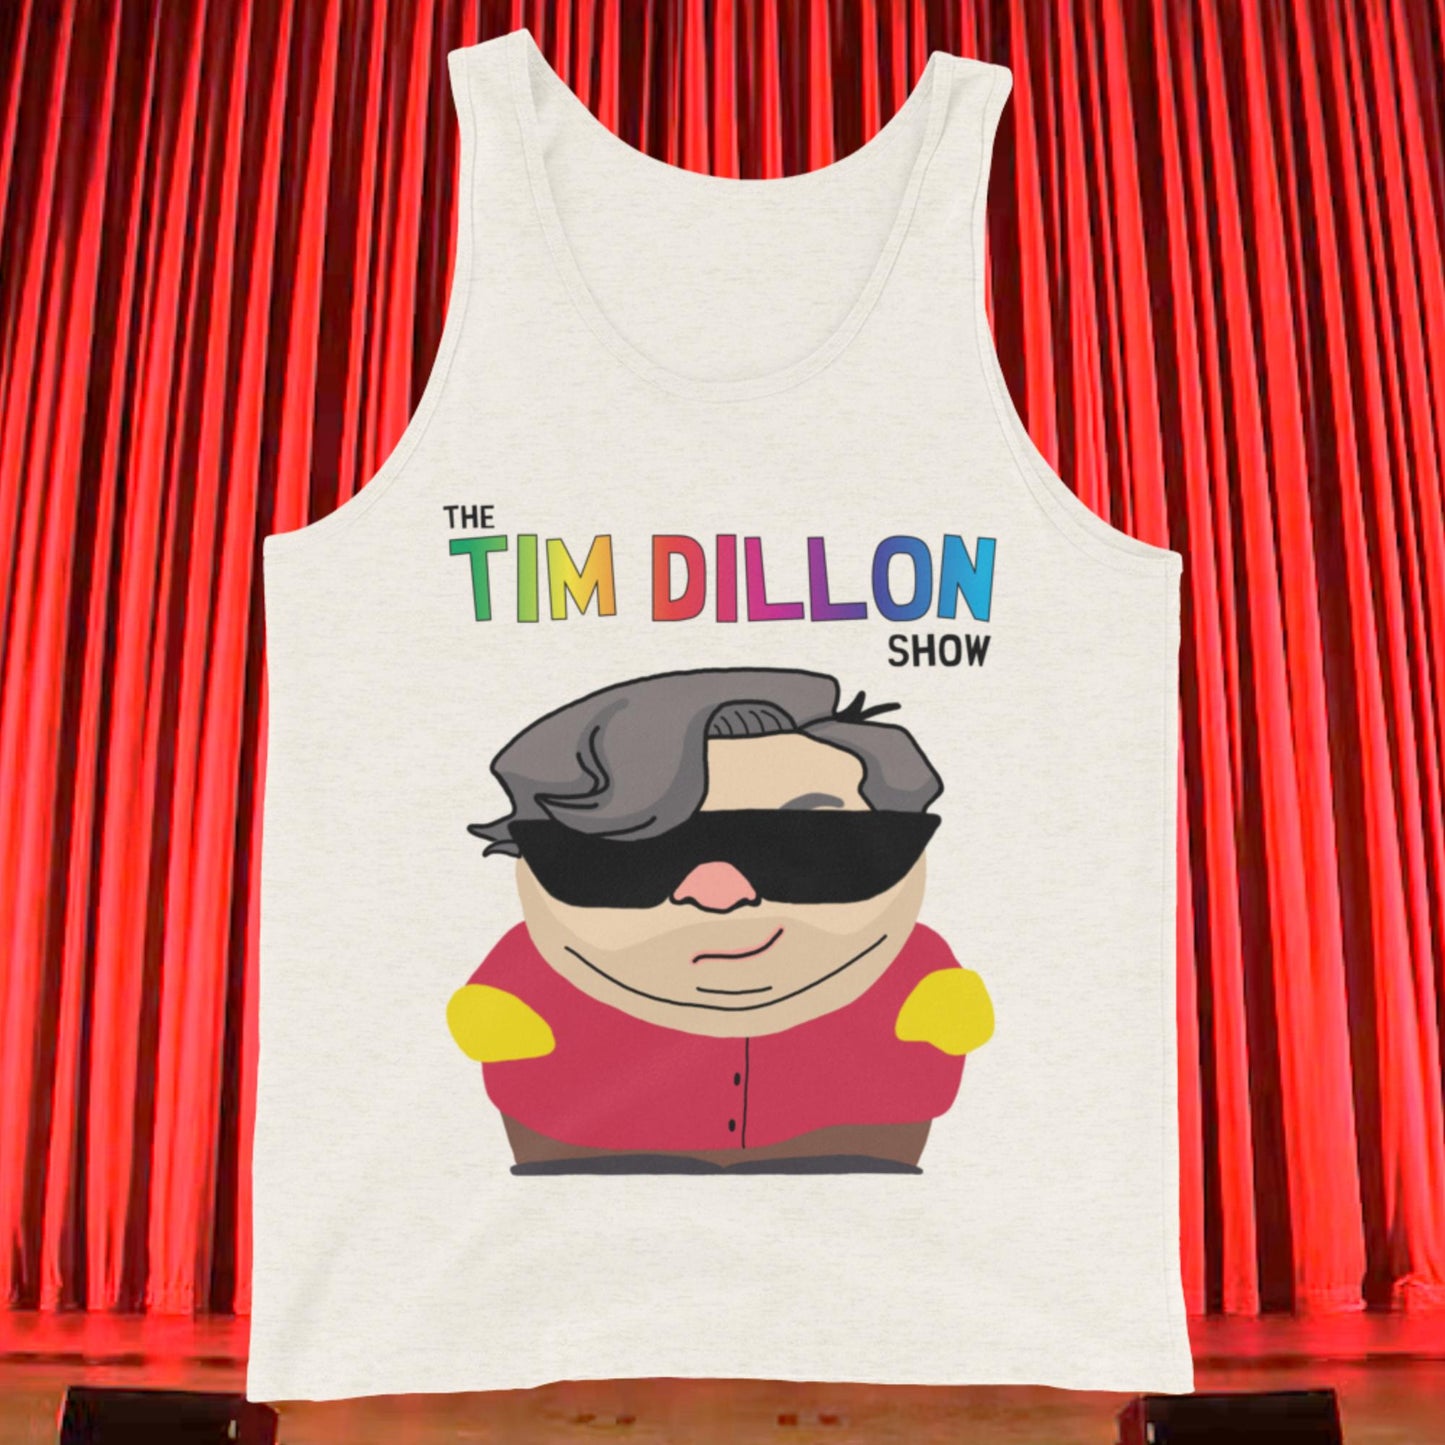 Tim Dillon Cartman, Southpark, The Tim Dillon Show, Tim Dillon Podcast, Tim Dillon Merch, Tim Dillon Men's Tank Top Next Cult Brand Podcasts, Stand-up Comedy, Tim Dillon